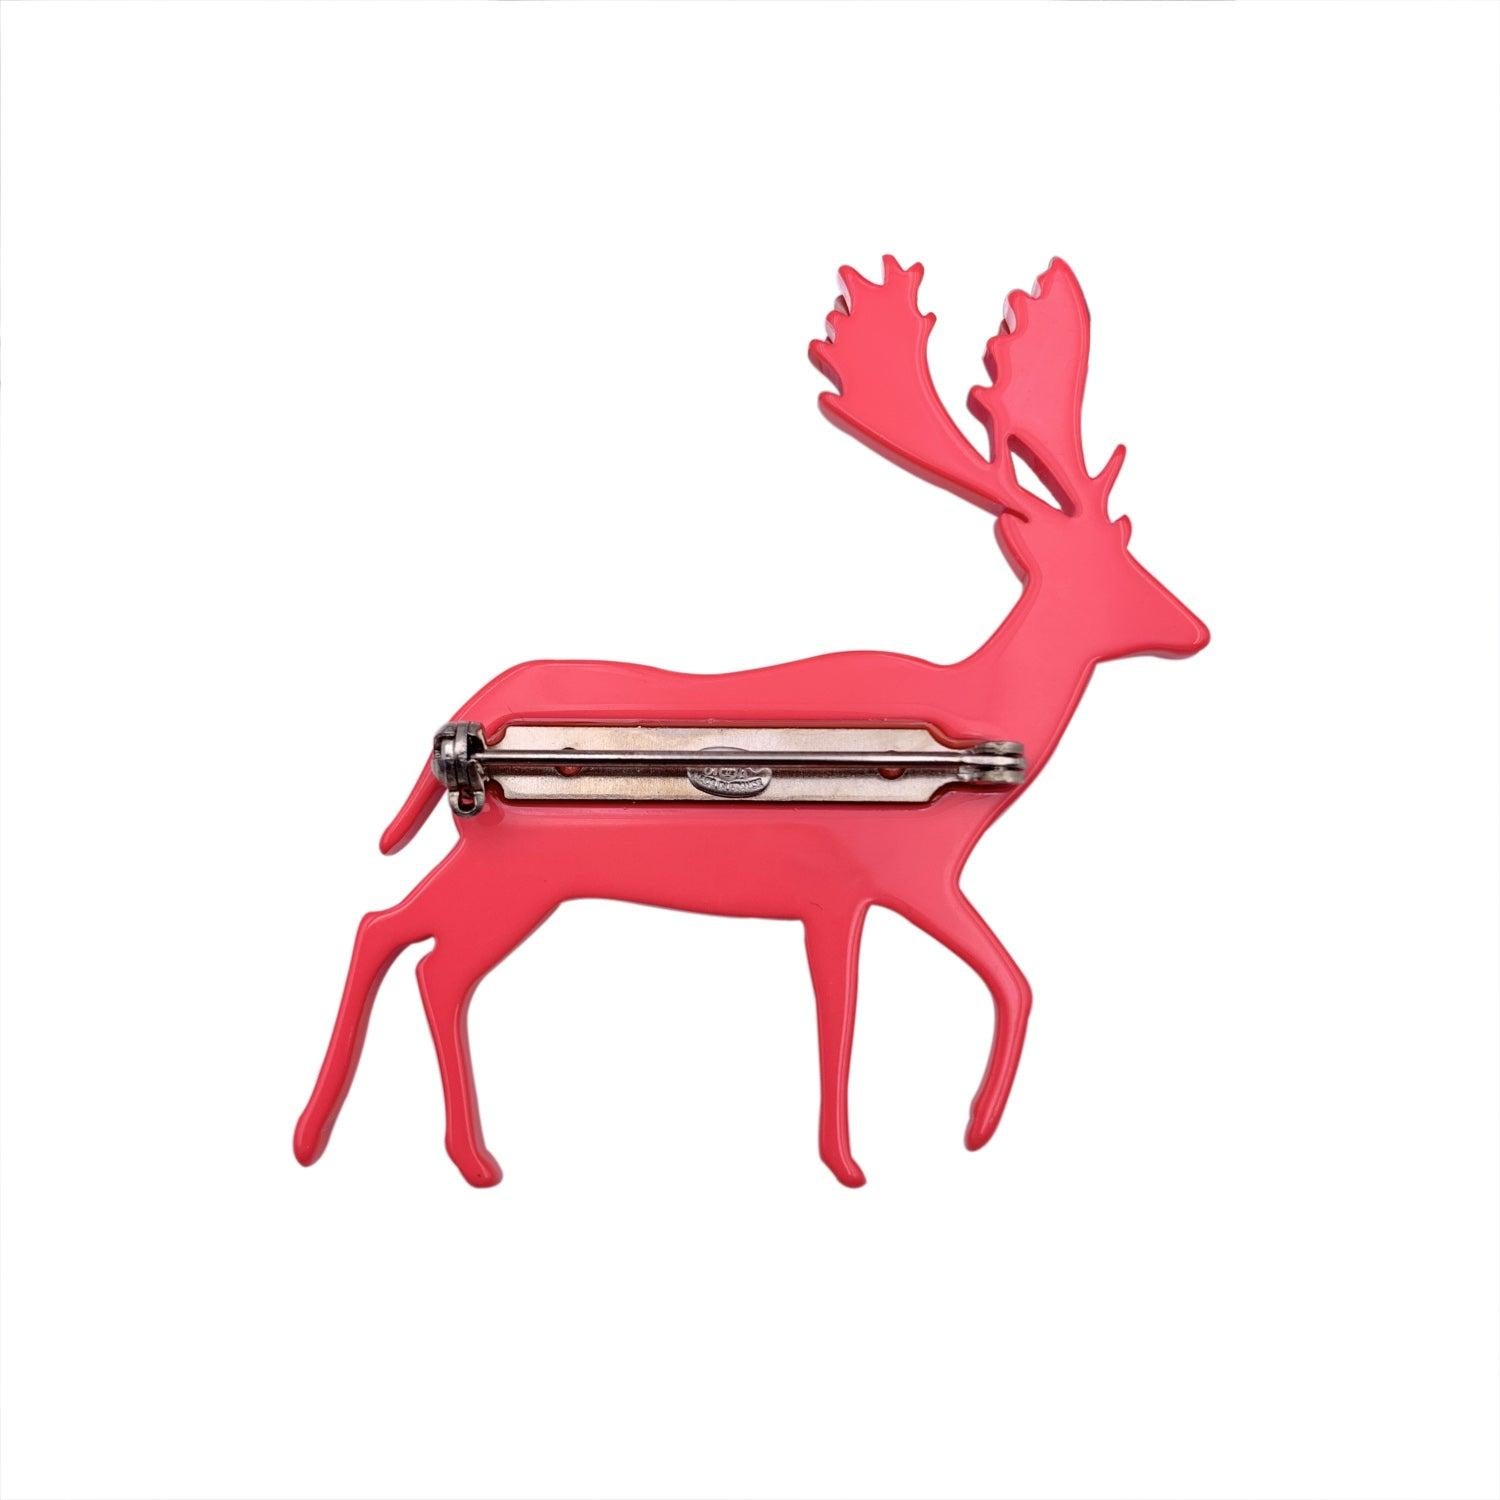 Chanel Pink Fuchsia Reindeer-shaped Brooch Pin from the 2001 collection. Crafted of fuchsia pink acrylic material. CC logos on the front. Safety pin closure. Measurements (HxW): 1.75 x 2 inches - 4.5 x 5.1 cm 'CHANEL - 01 CC A - Made in France' oval